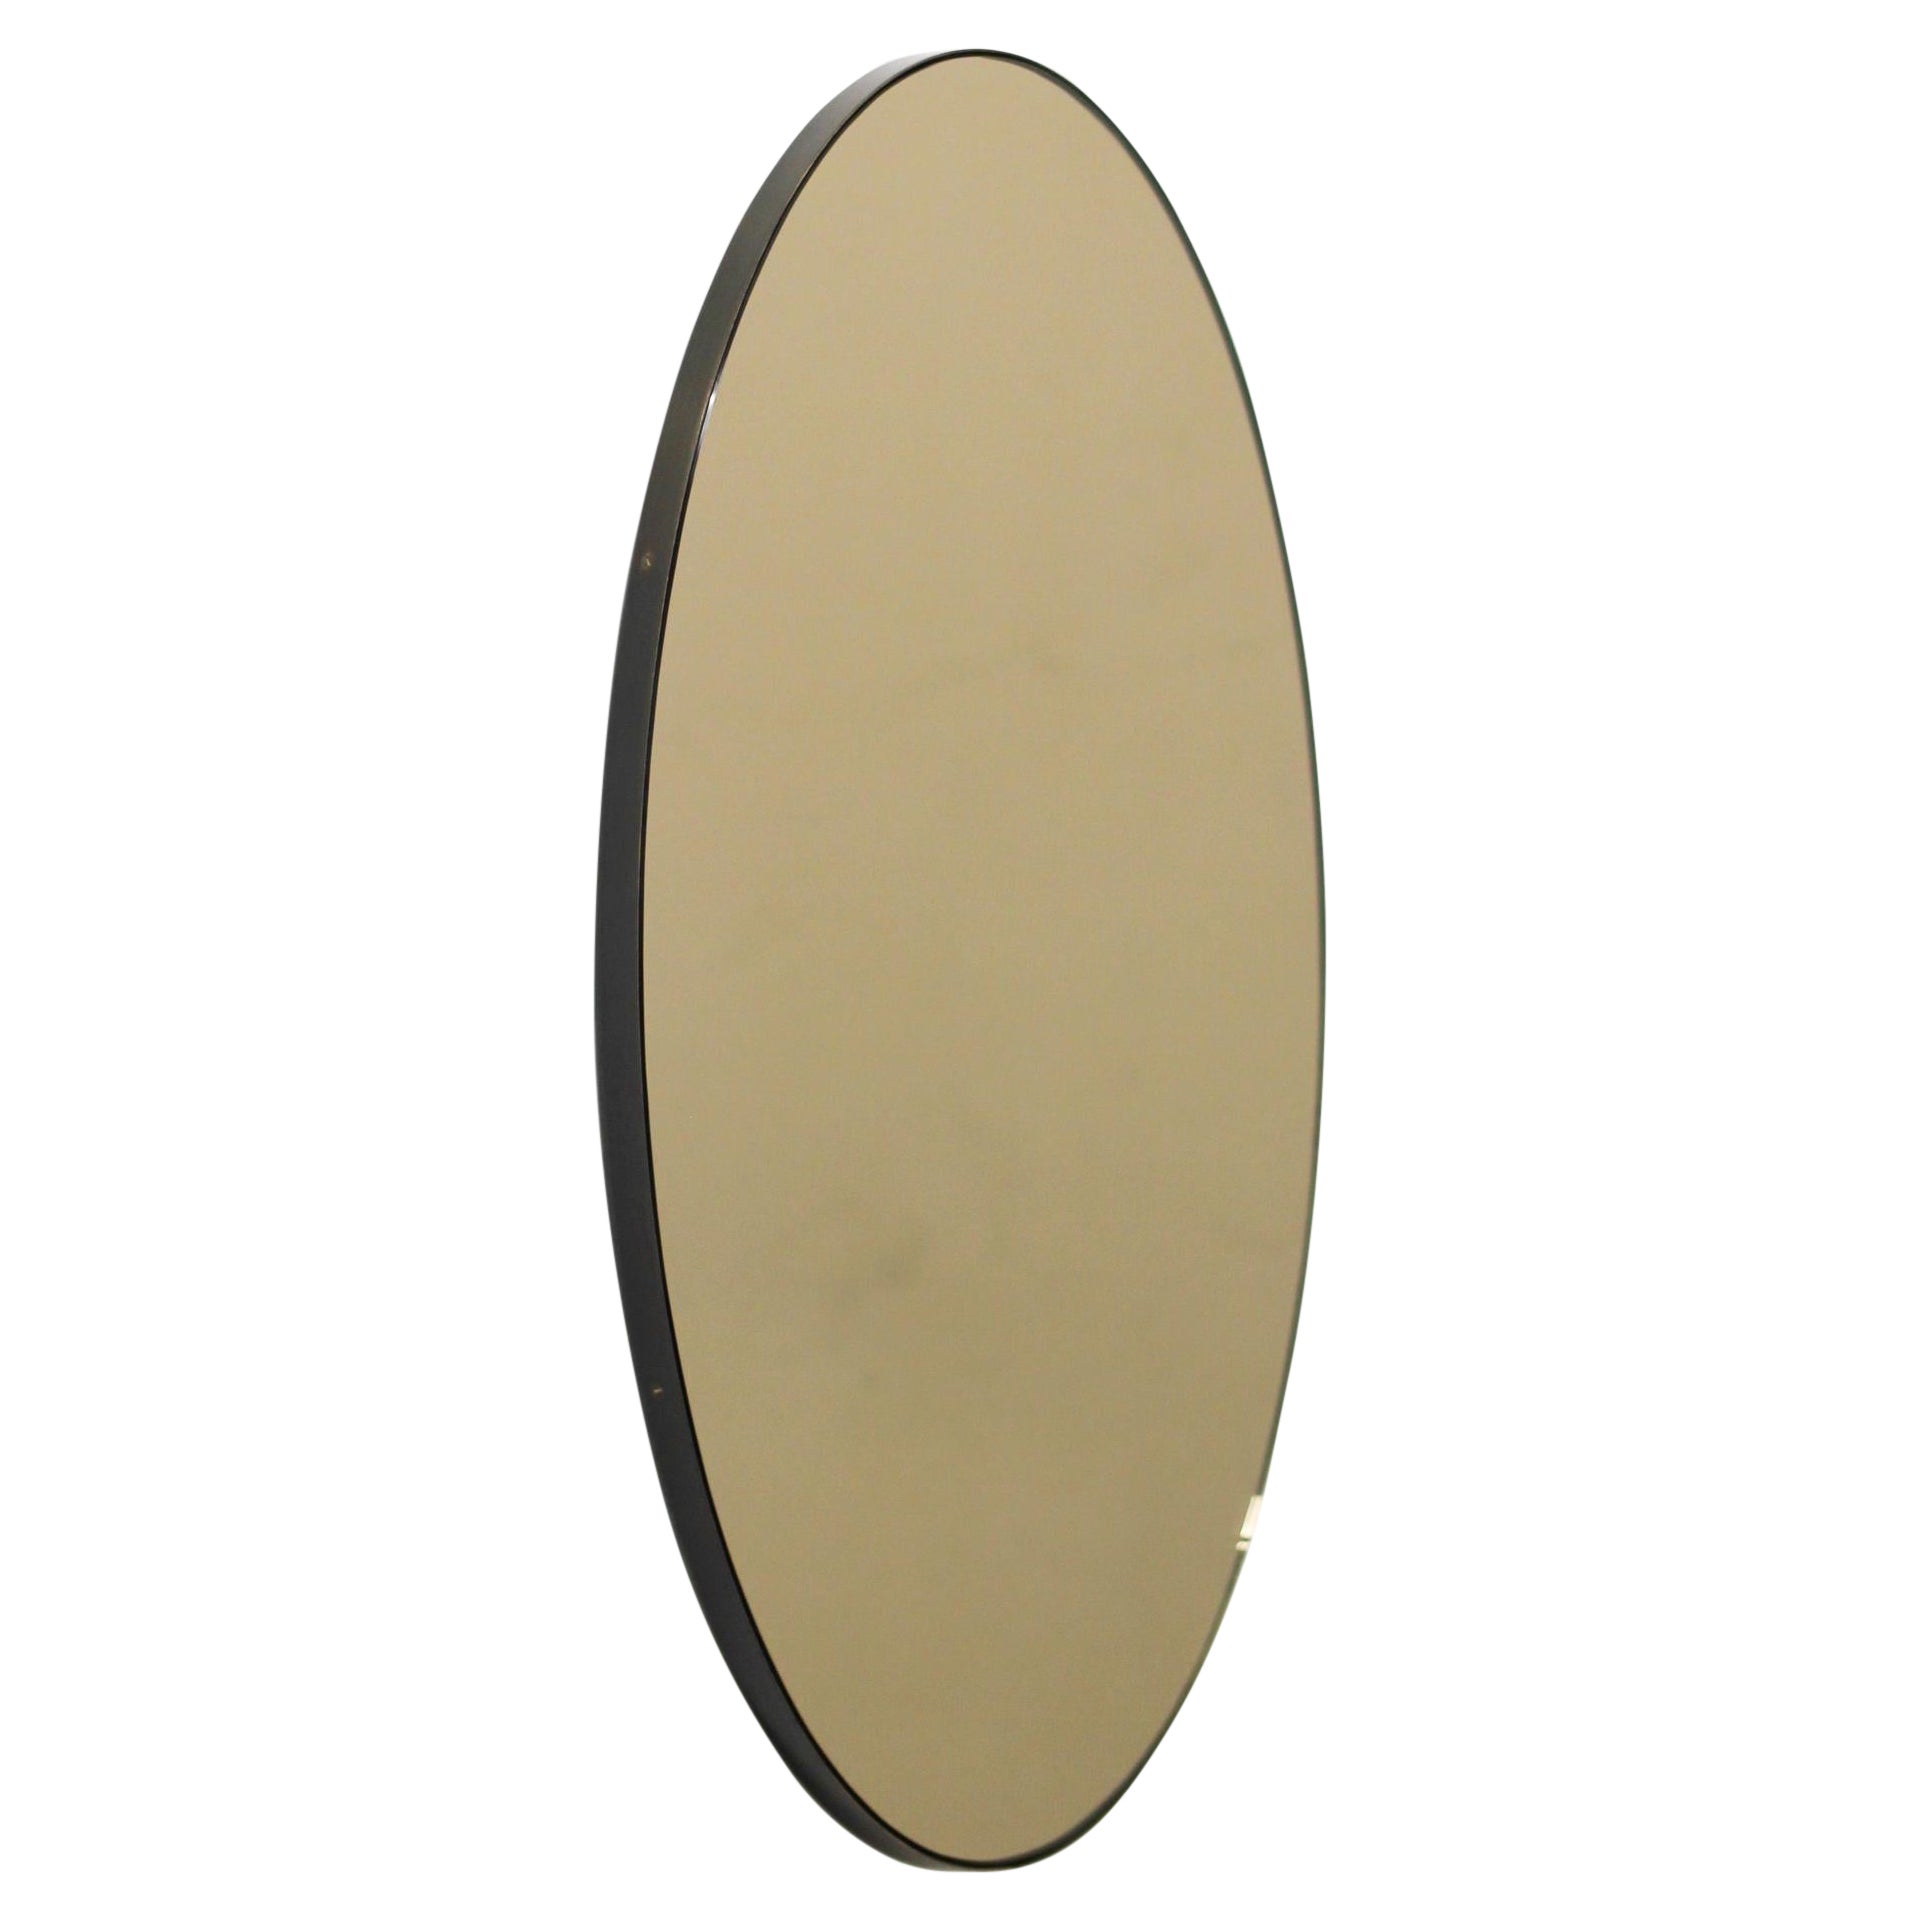 Ovalis Oval Bronze Tinted Contemporary Mirror with Patina Frame, Medium For Sale